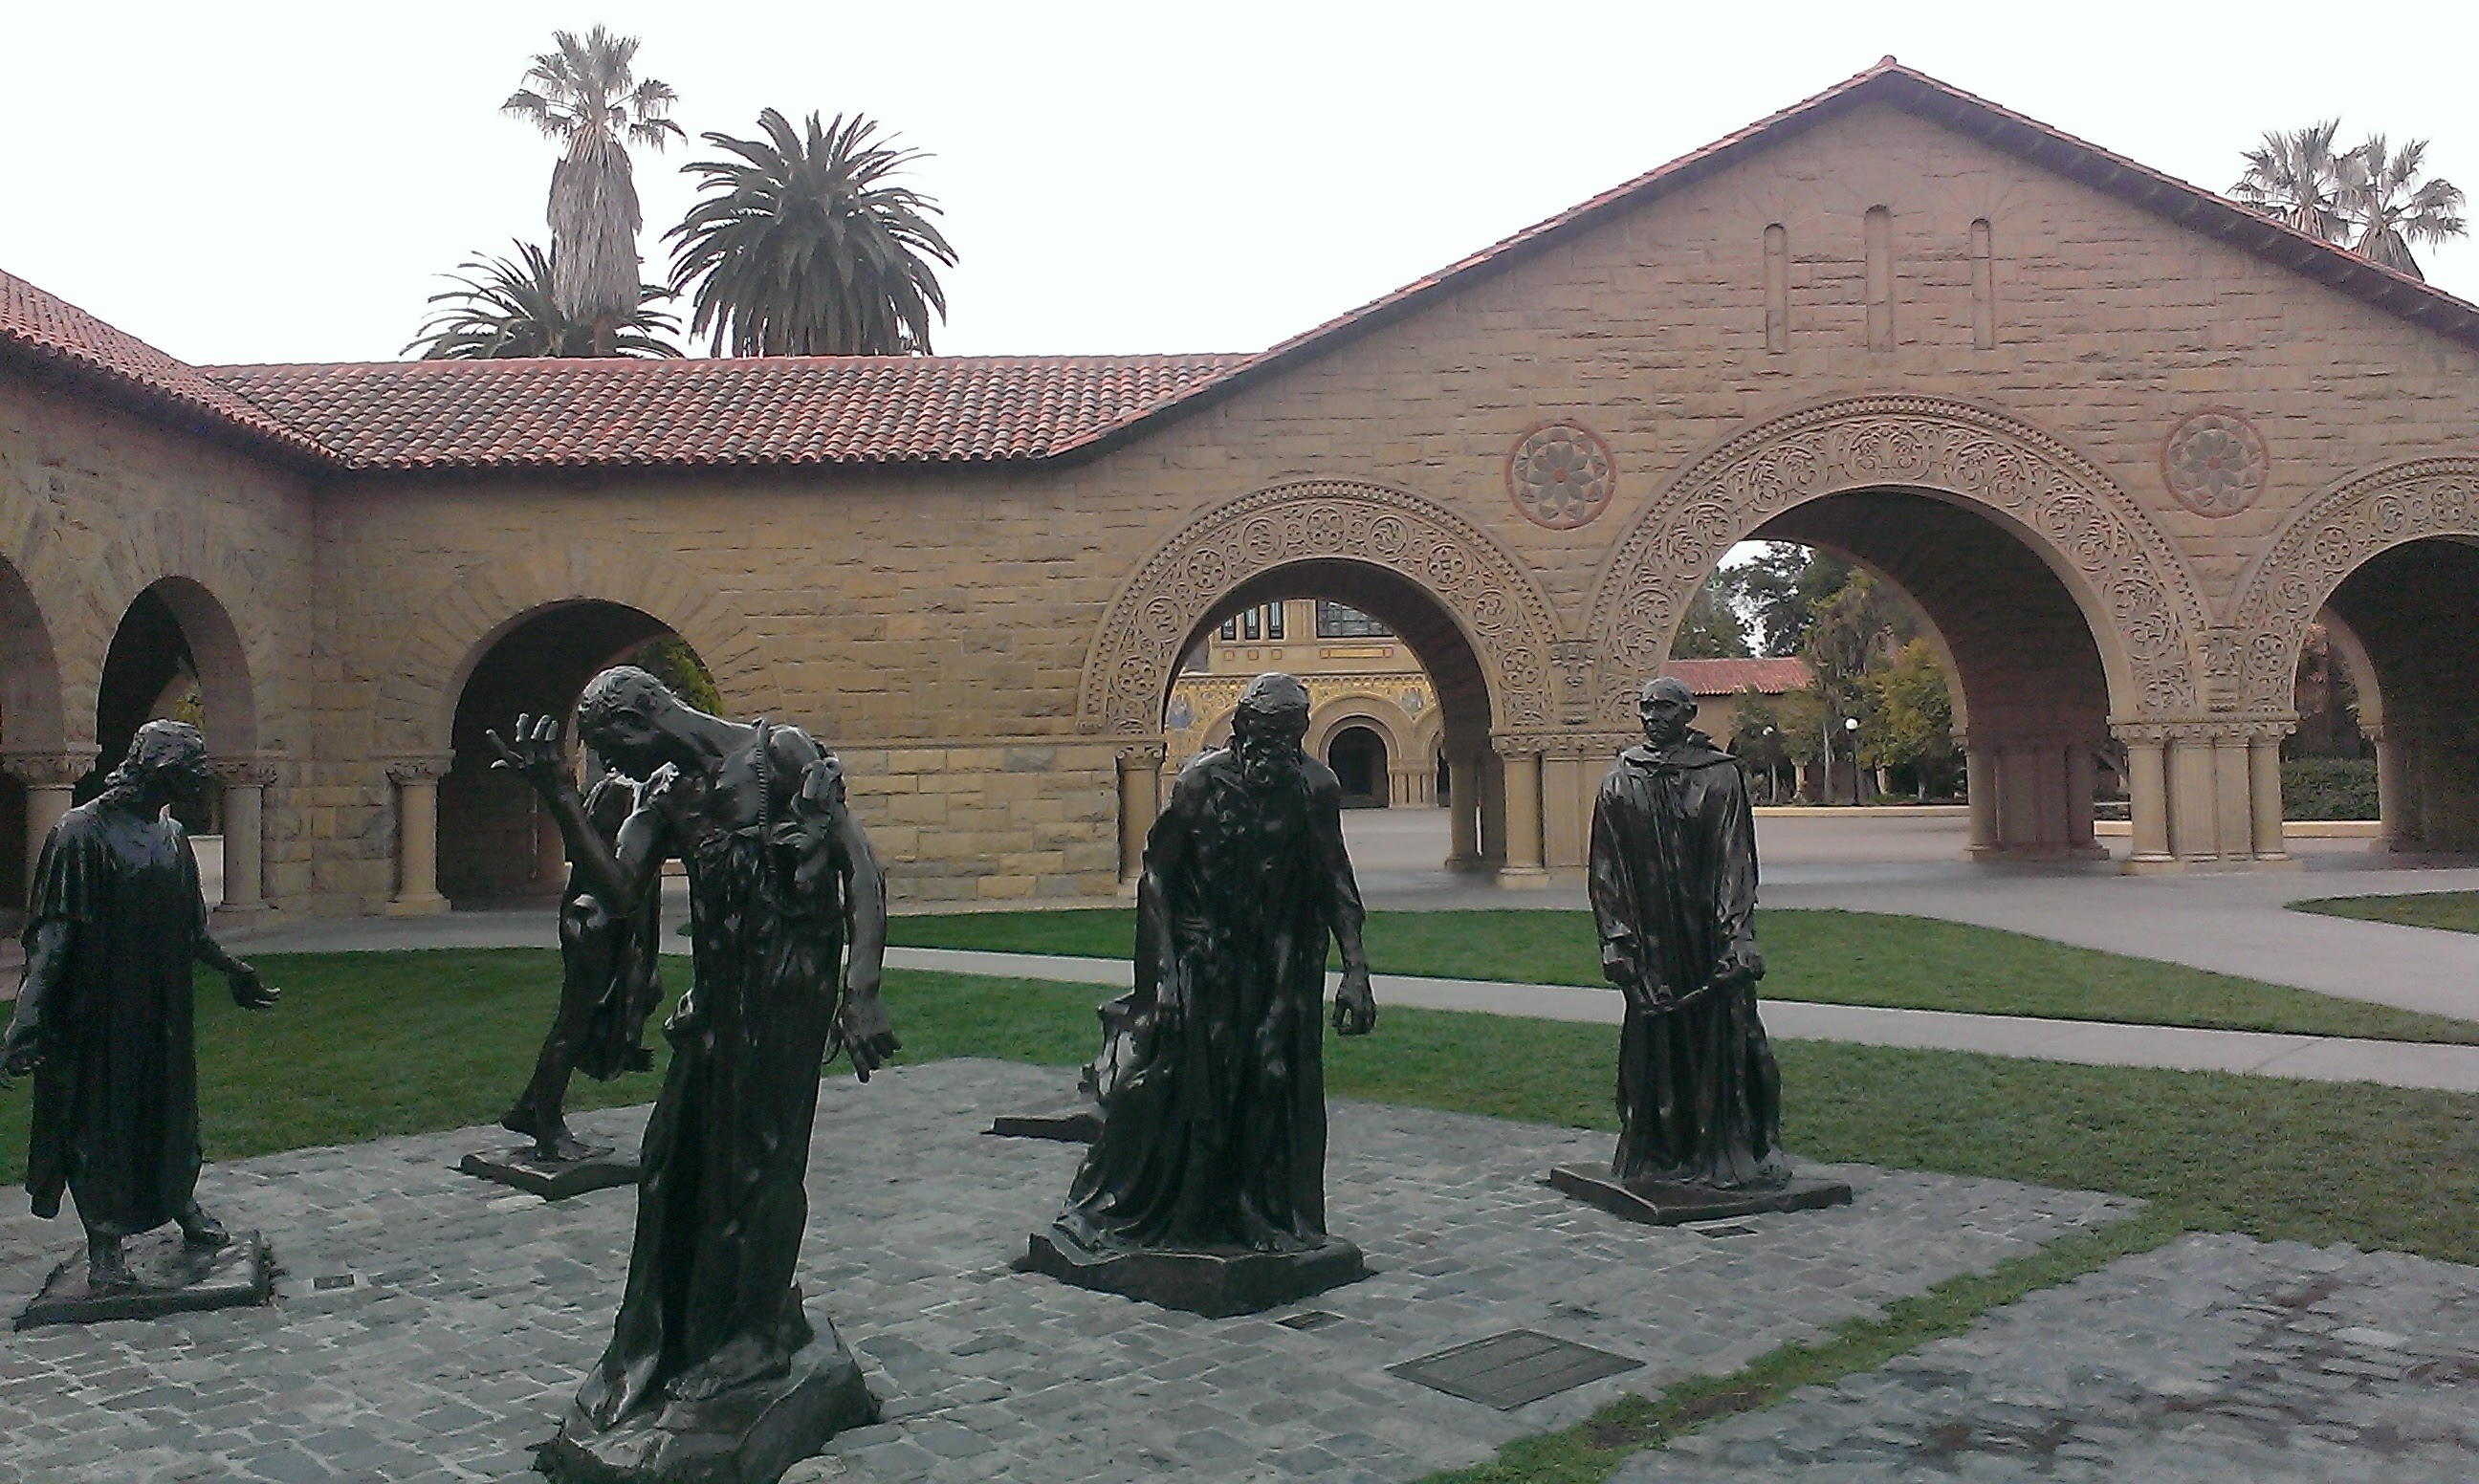 Stanford, CA, USA, March 2014